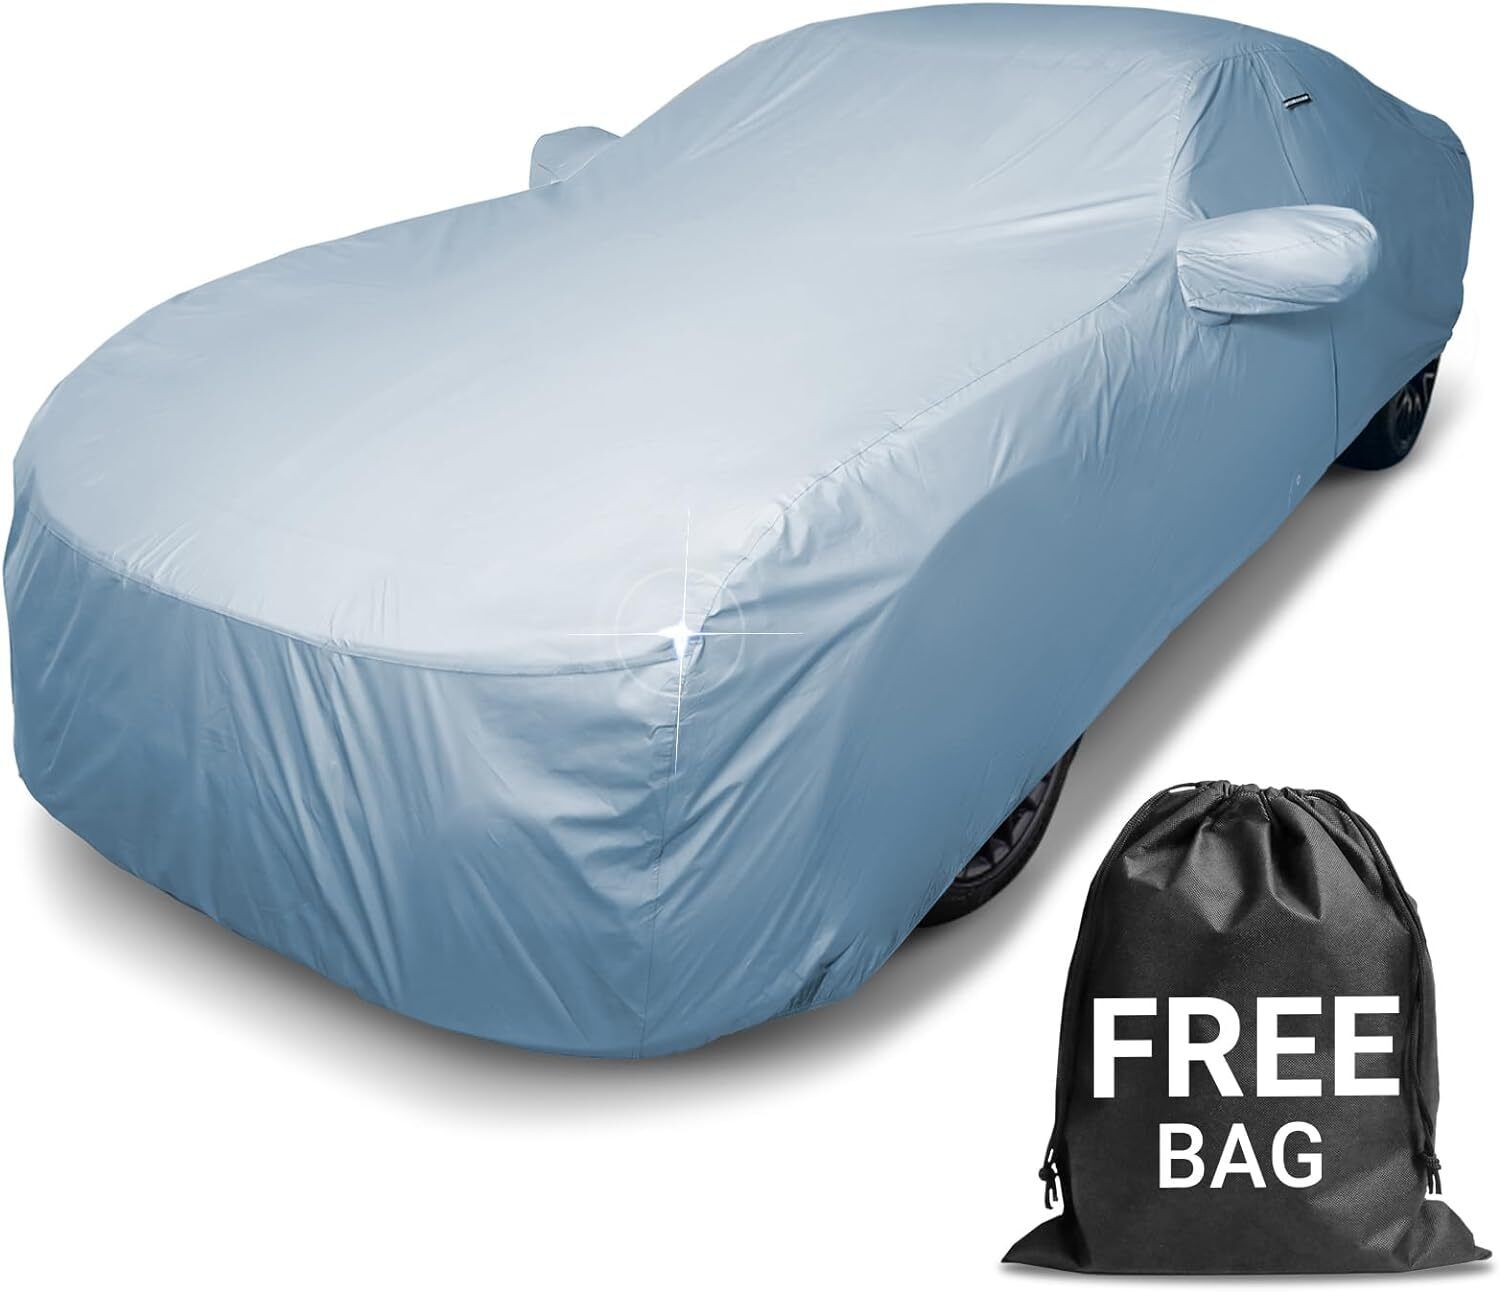 Car Cover Waterproof All Weather | Premium Quality Car Covers for Automobiles